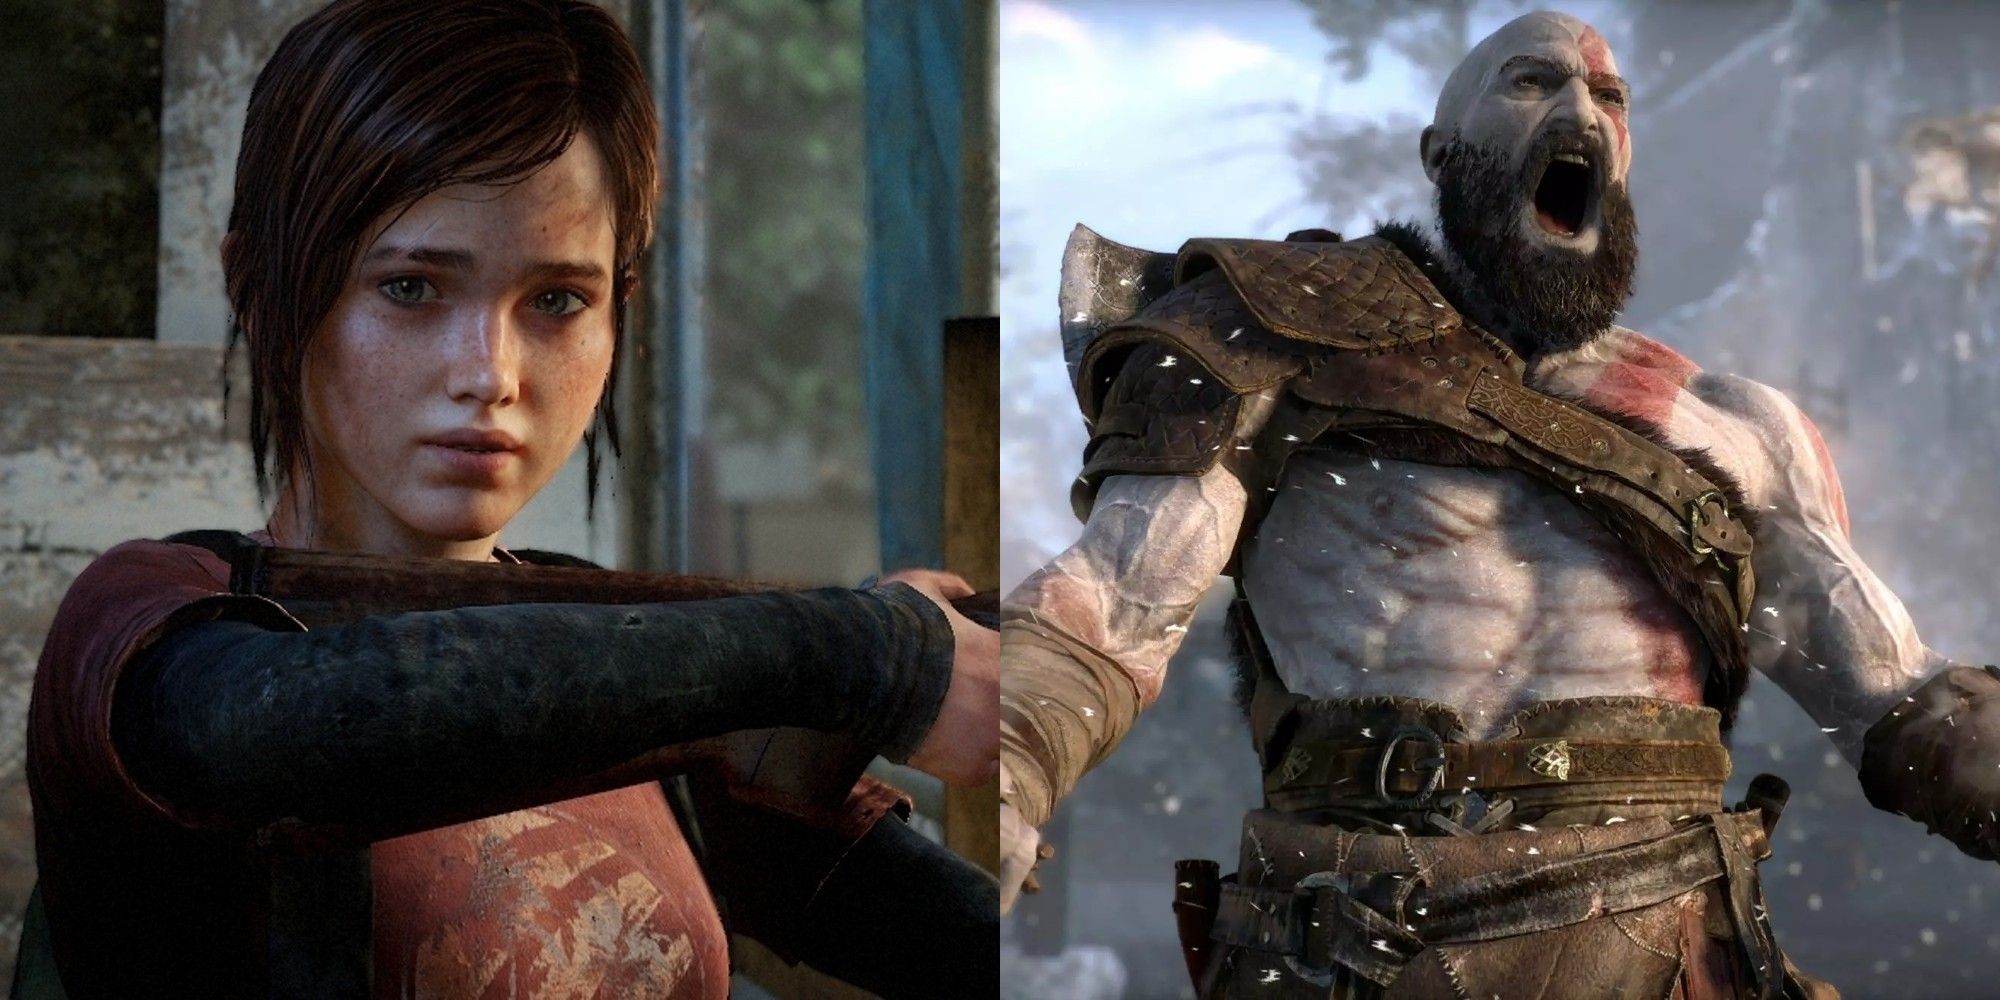 Split image of Ellie from The Last of Us and Kratos from God of War